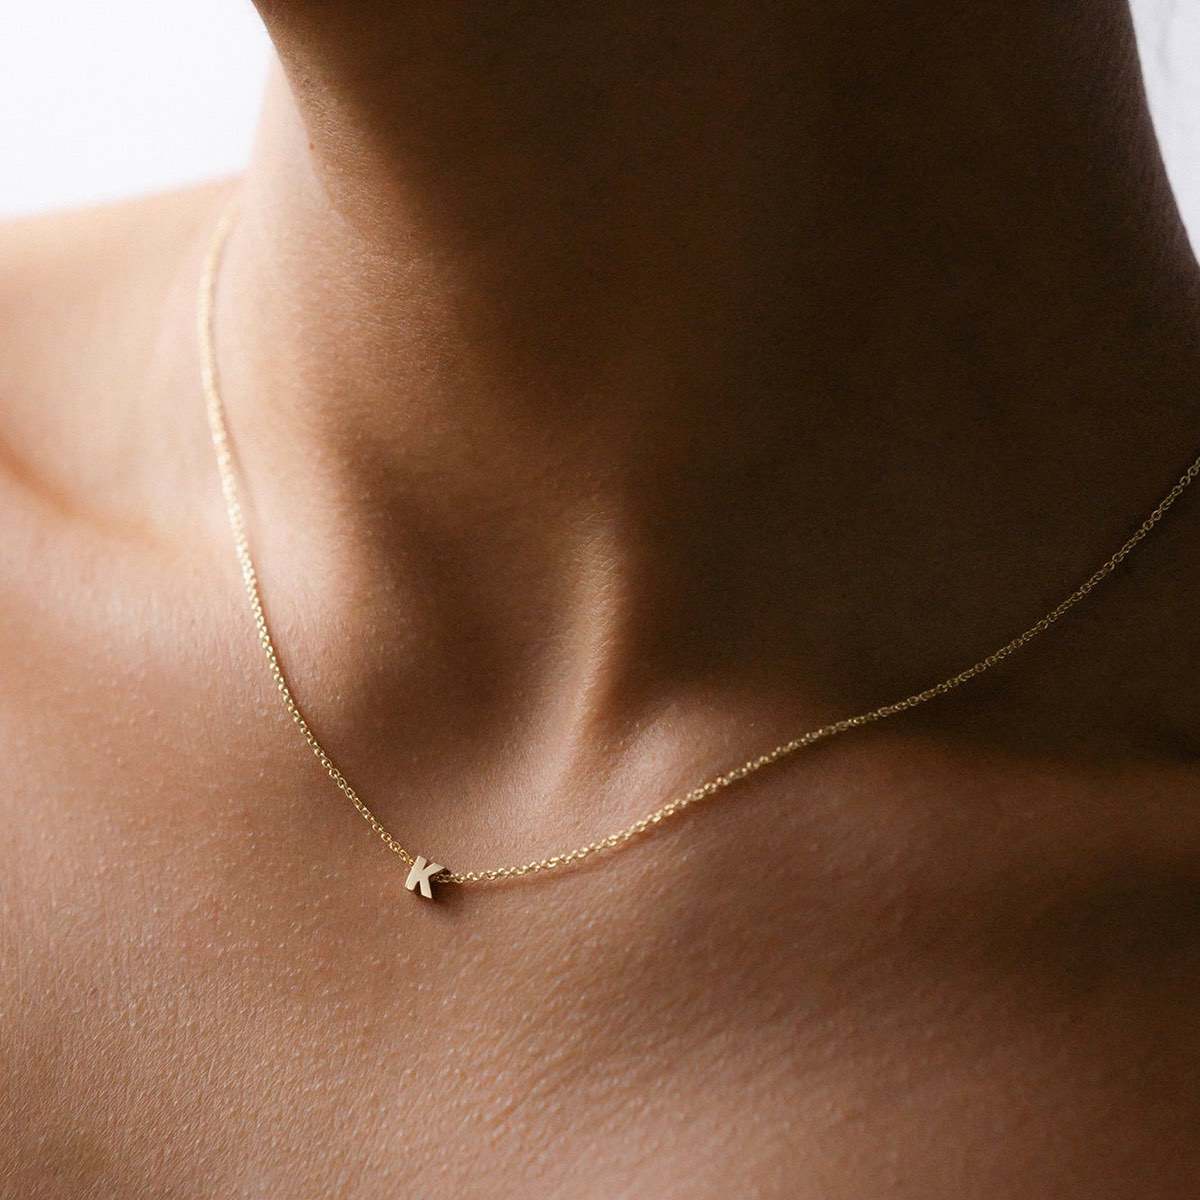 Hand finished solid gold letter necklace: Close up of a model wearing our beautiful 9ct yellow gold Tiny Letter K Charm Necklace with a 40cm cable chain